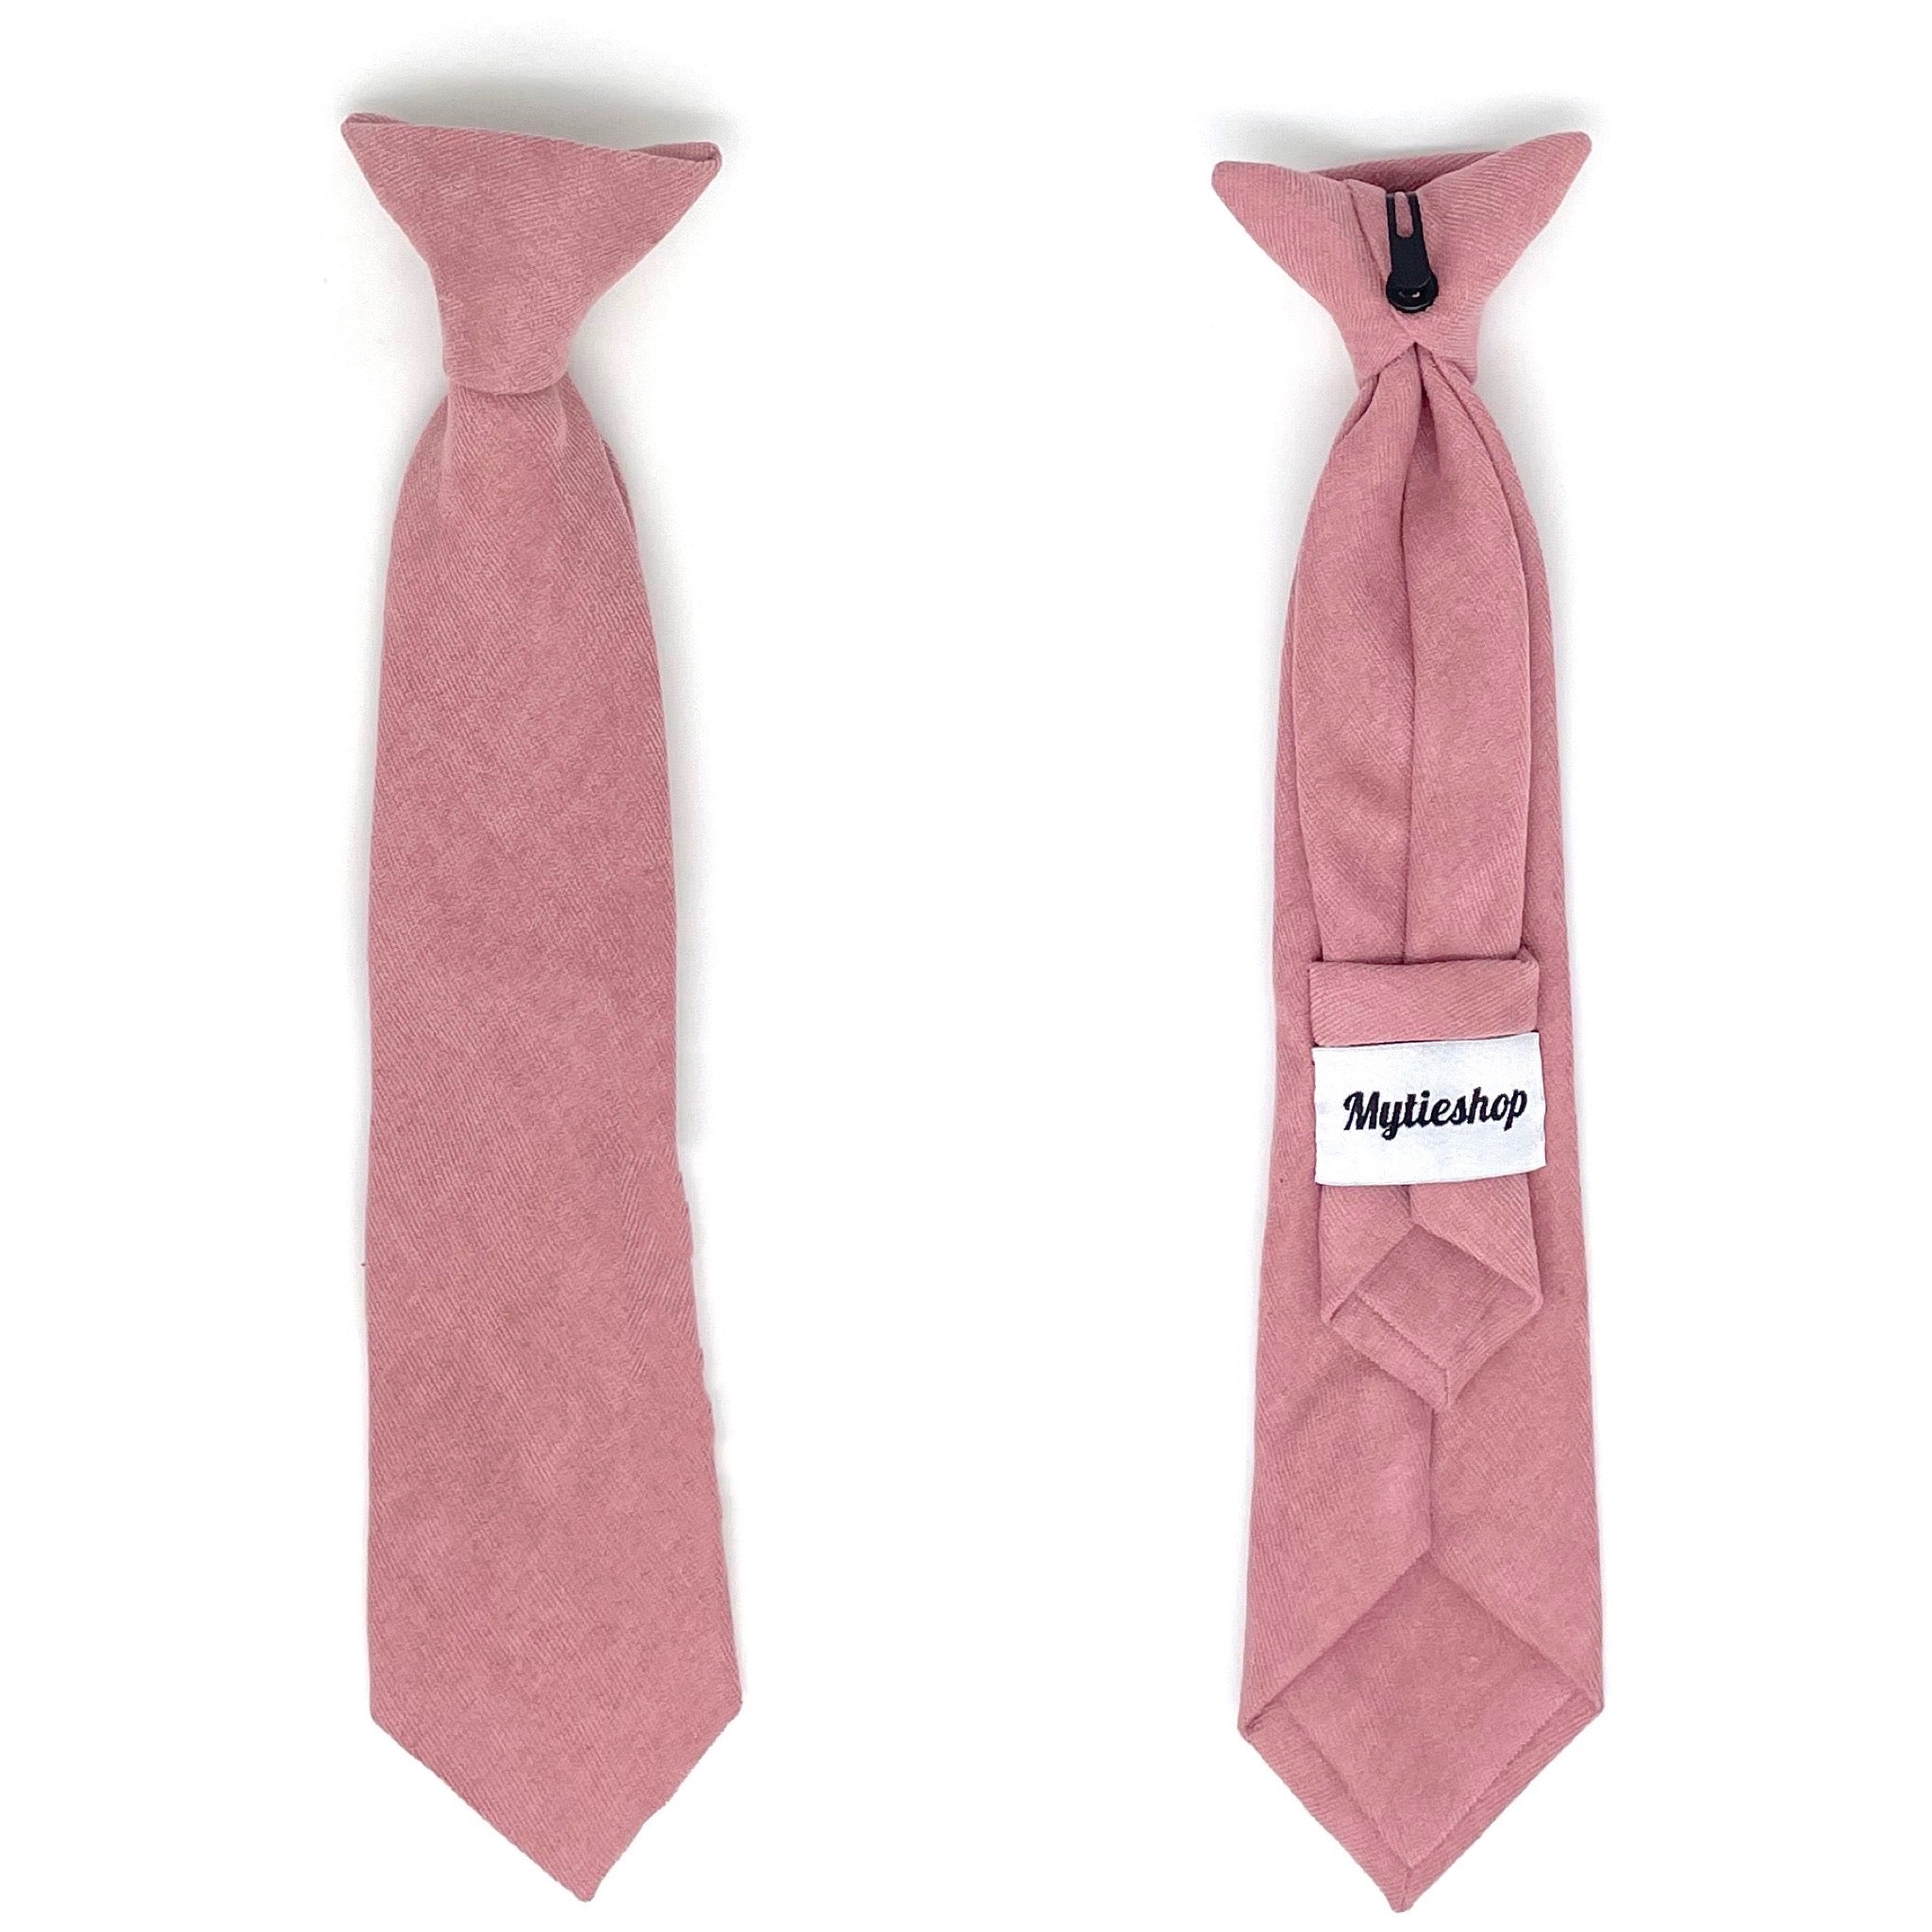 Pink Boys Floral Clip On Tie 2.36 Mytieshop - ROSÉ-Pink Boys Floral Clip On Tie Material: Suede Approx Size: Color: Pink Max width: 6.5 cm / 2.4 inches Available sizes: 9-24 months 26 CM 2-5 years 31 CM 9-11 Years 43 CM Great for Prom Dinners Interviews Photo shoots Photo sessions Dates Wedding Attendant Ring Bearers Kids clip on tie. Fits boys and kids. bow tie floral for wedding and events groom groomsmen flower bow tie mytieshop ring bearer page boy bow tie white bow tie white and blue tie ki